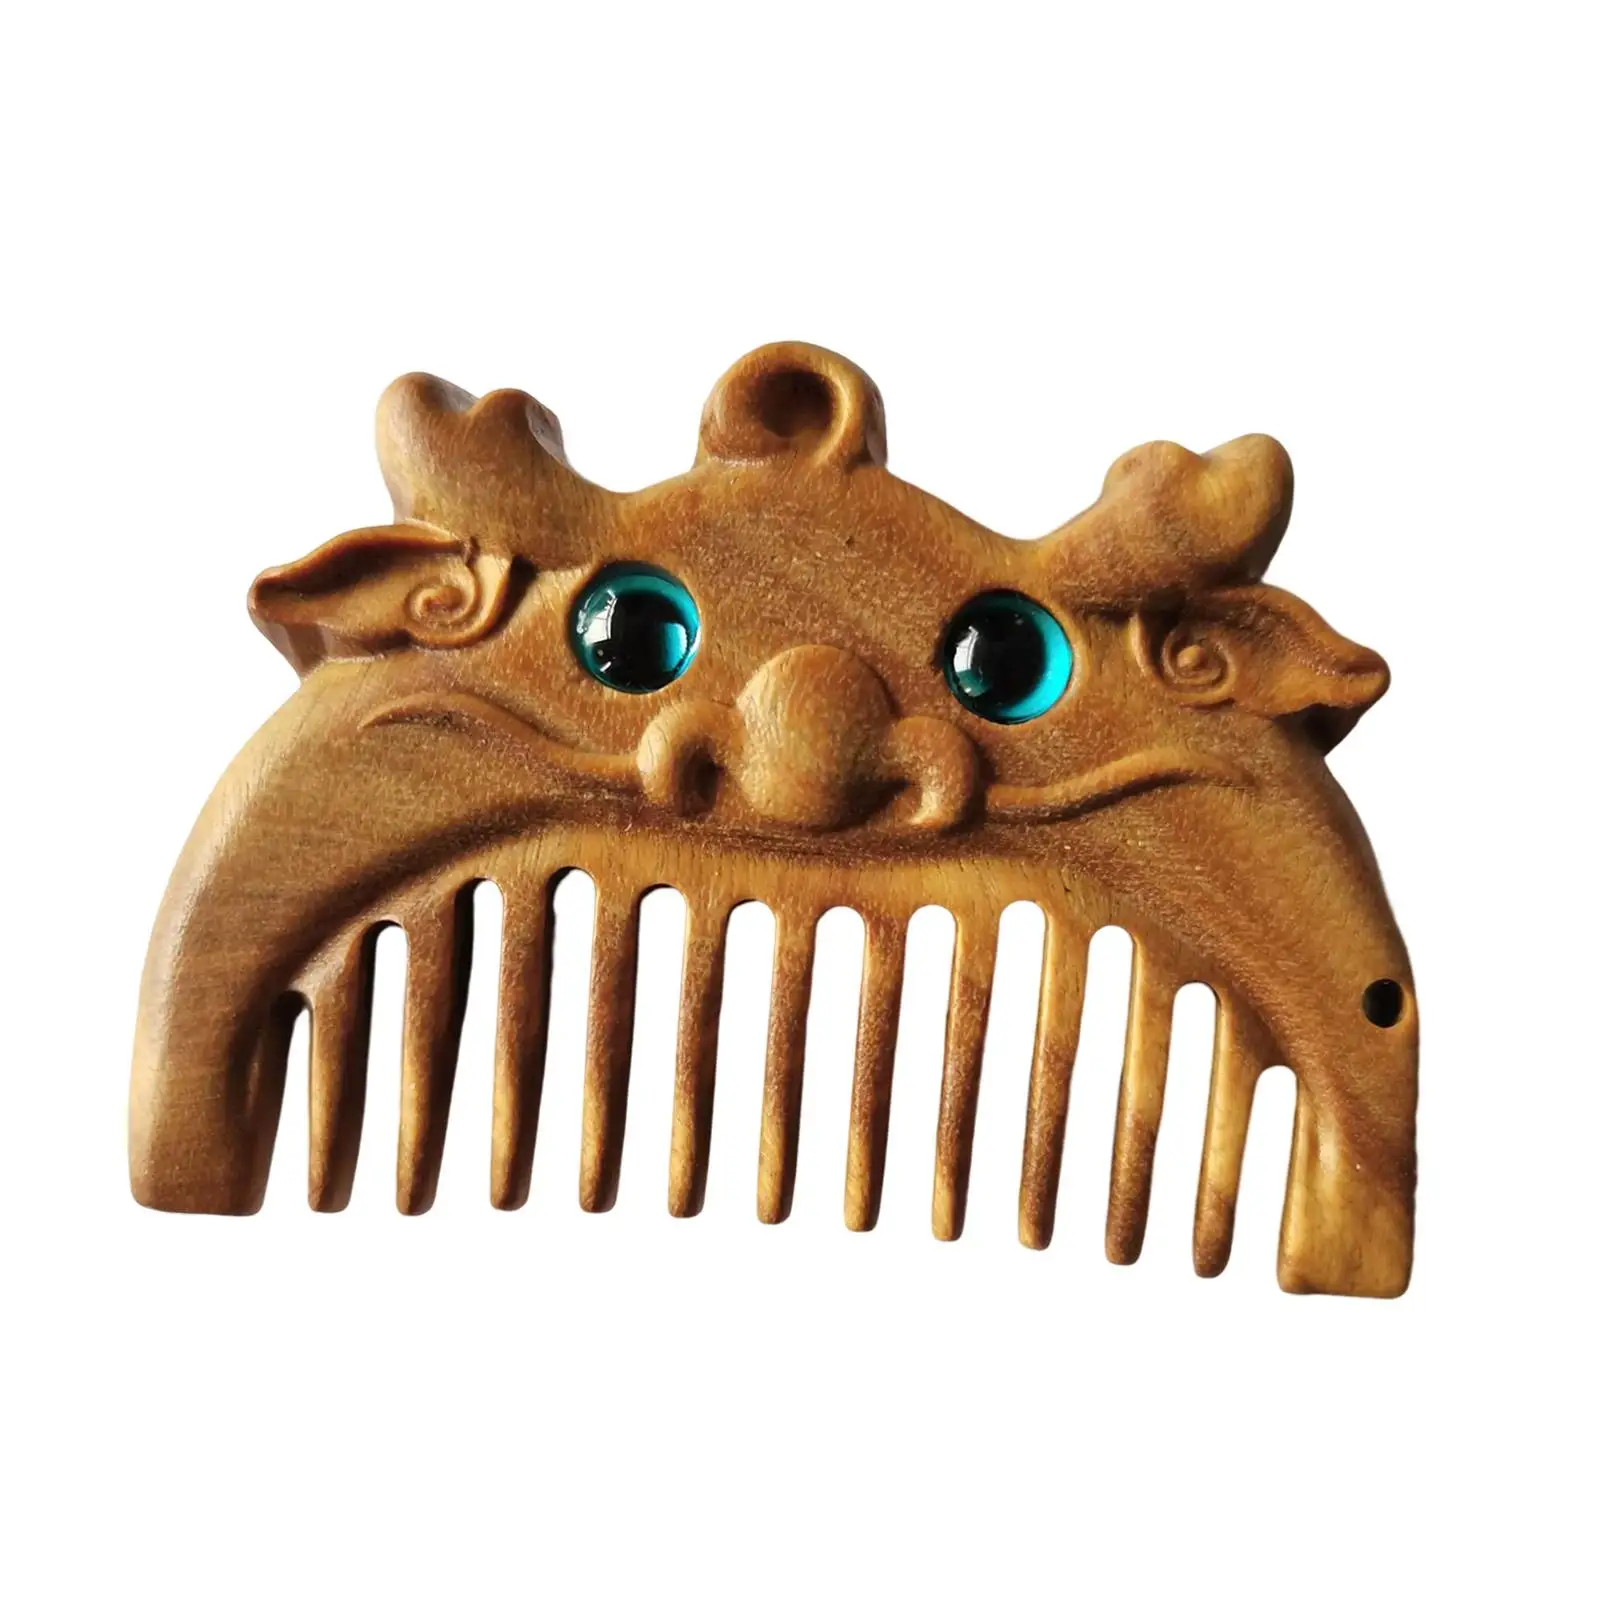 Wooden mini hair combs Cute Short Fine Toothed Green No Static Lightweight Hair Comb Short Hair Comb for Women and Men Gifts